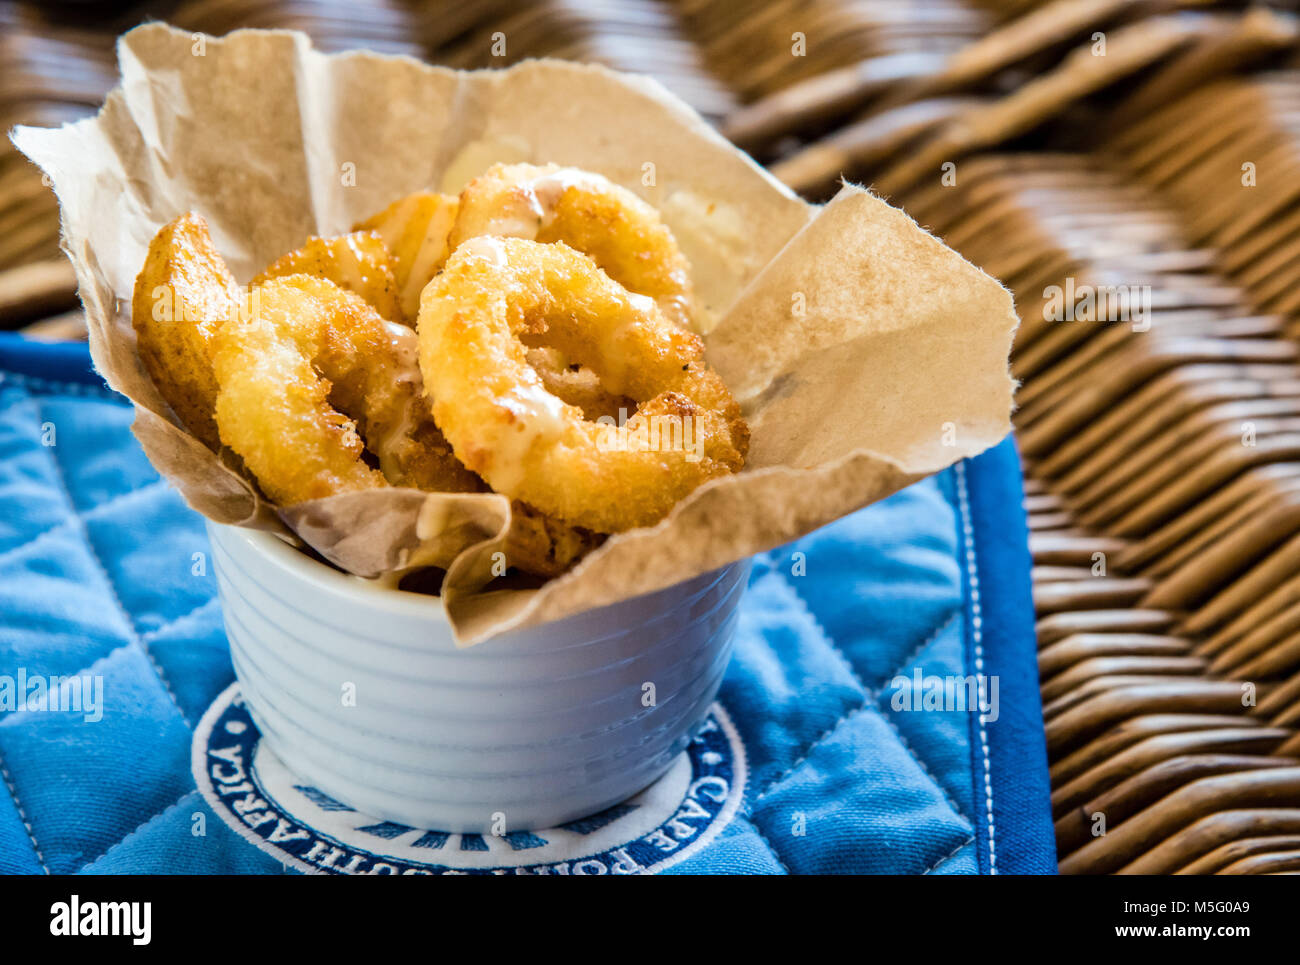 Fried calamari rings and chips, top view macro photo, food photography. Fish and chips in paper, white dish, blue background, closeup, low angle view. Stock Photo